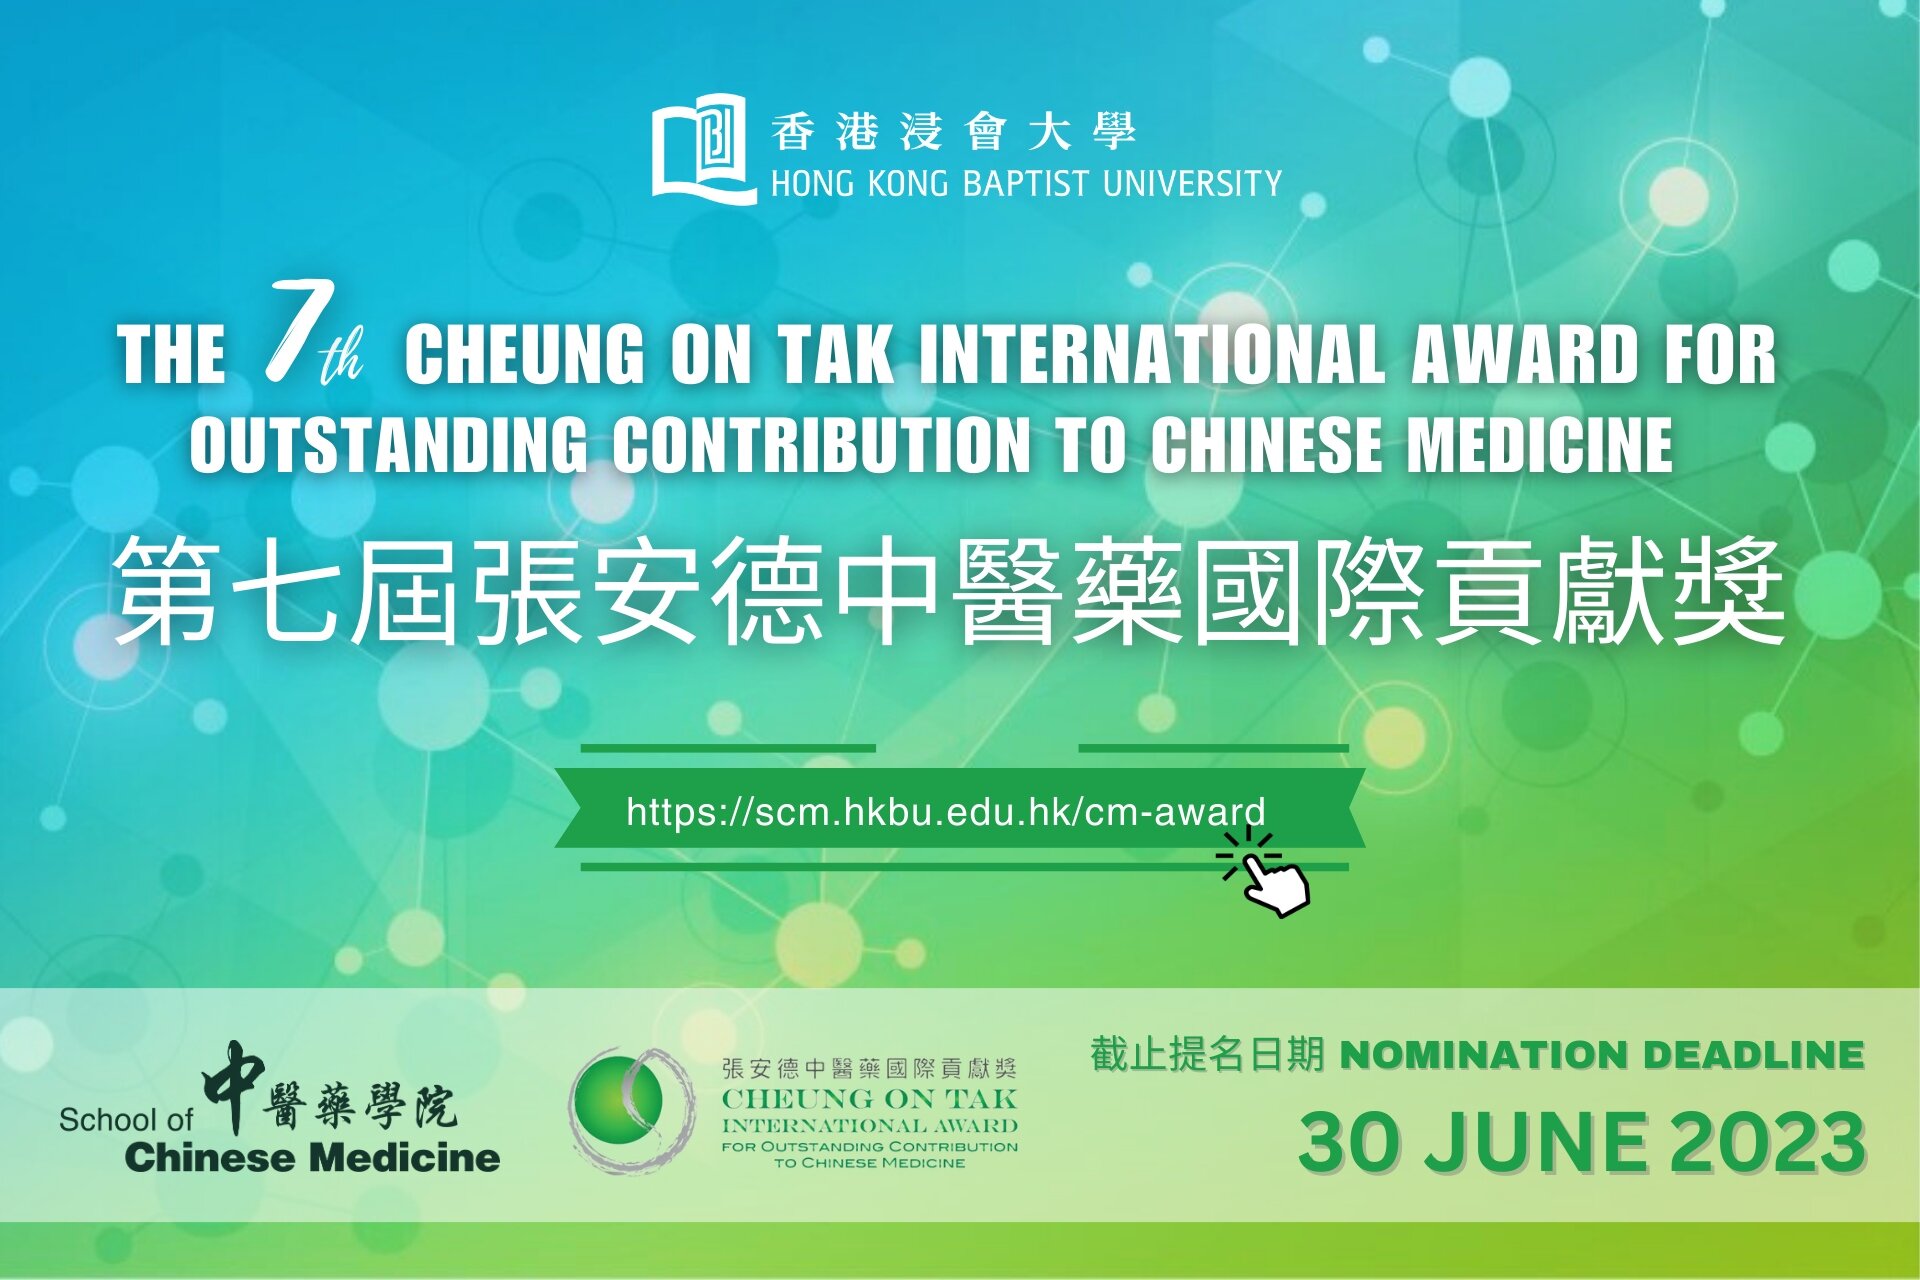 Poster for the 7th Cheung On Tak International Award for Outstanding Contribution to Chinese Medicine.